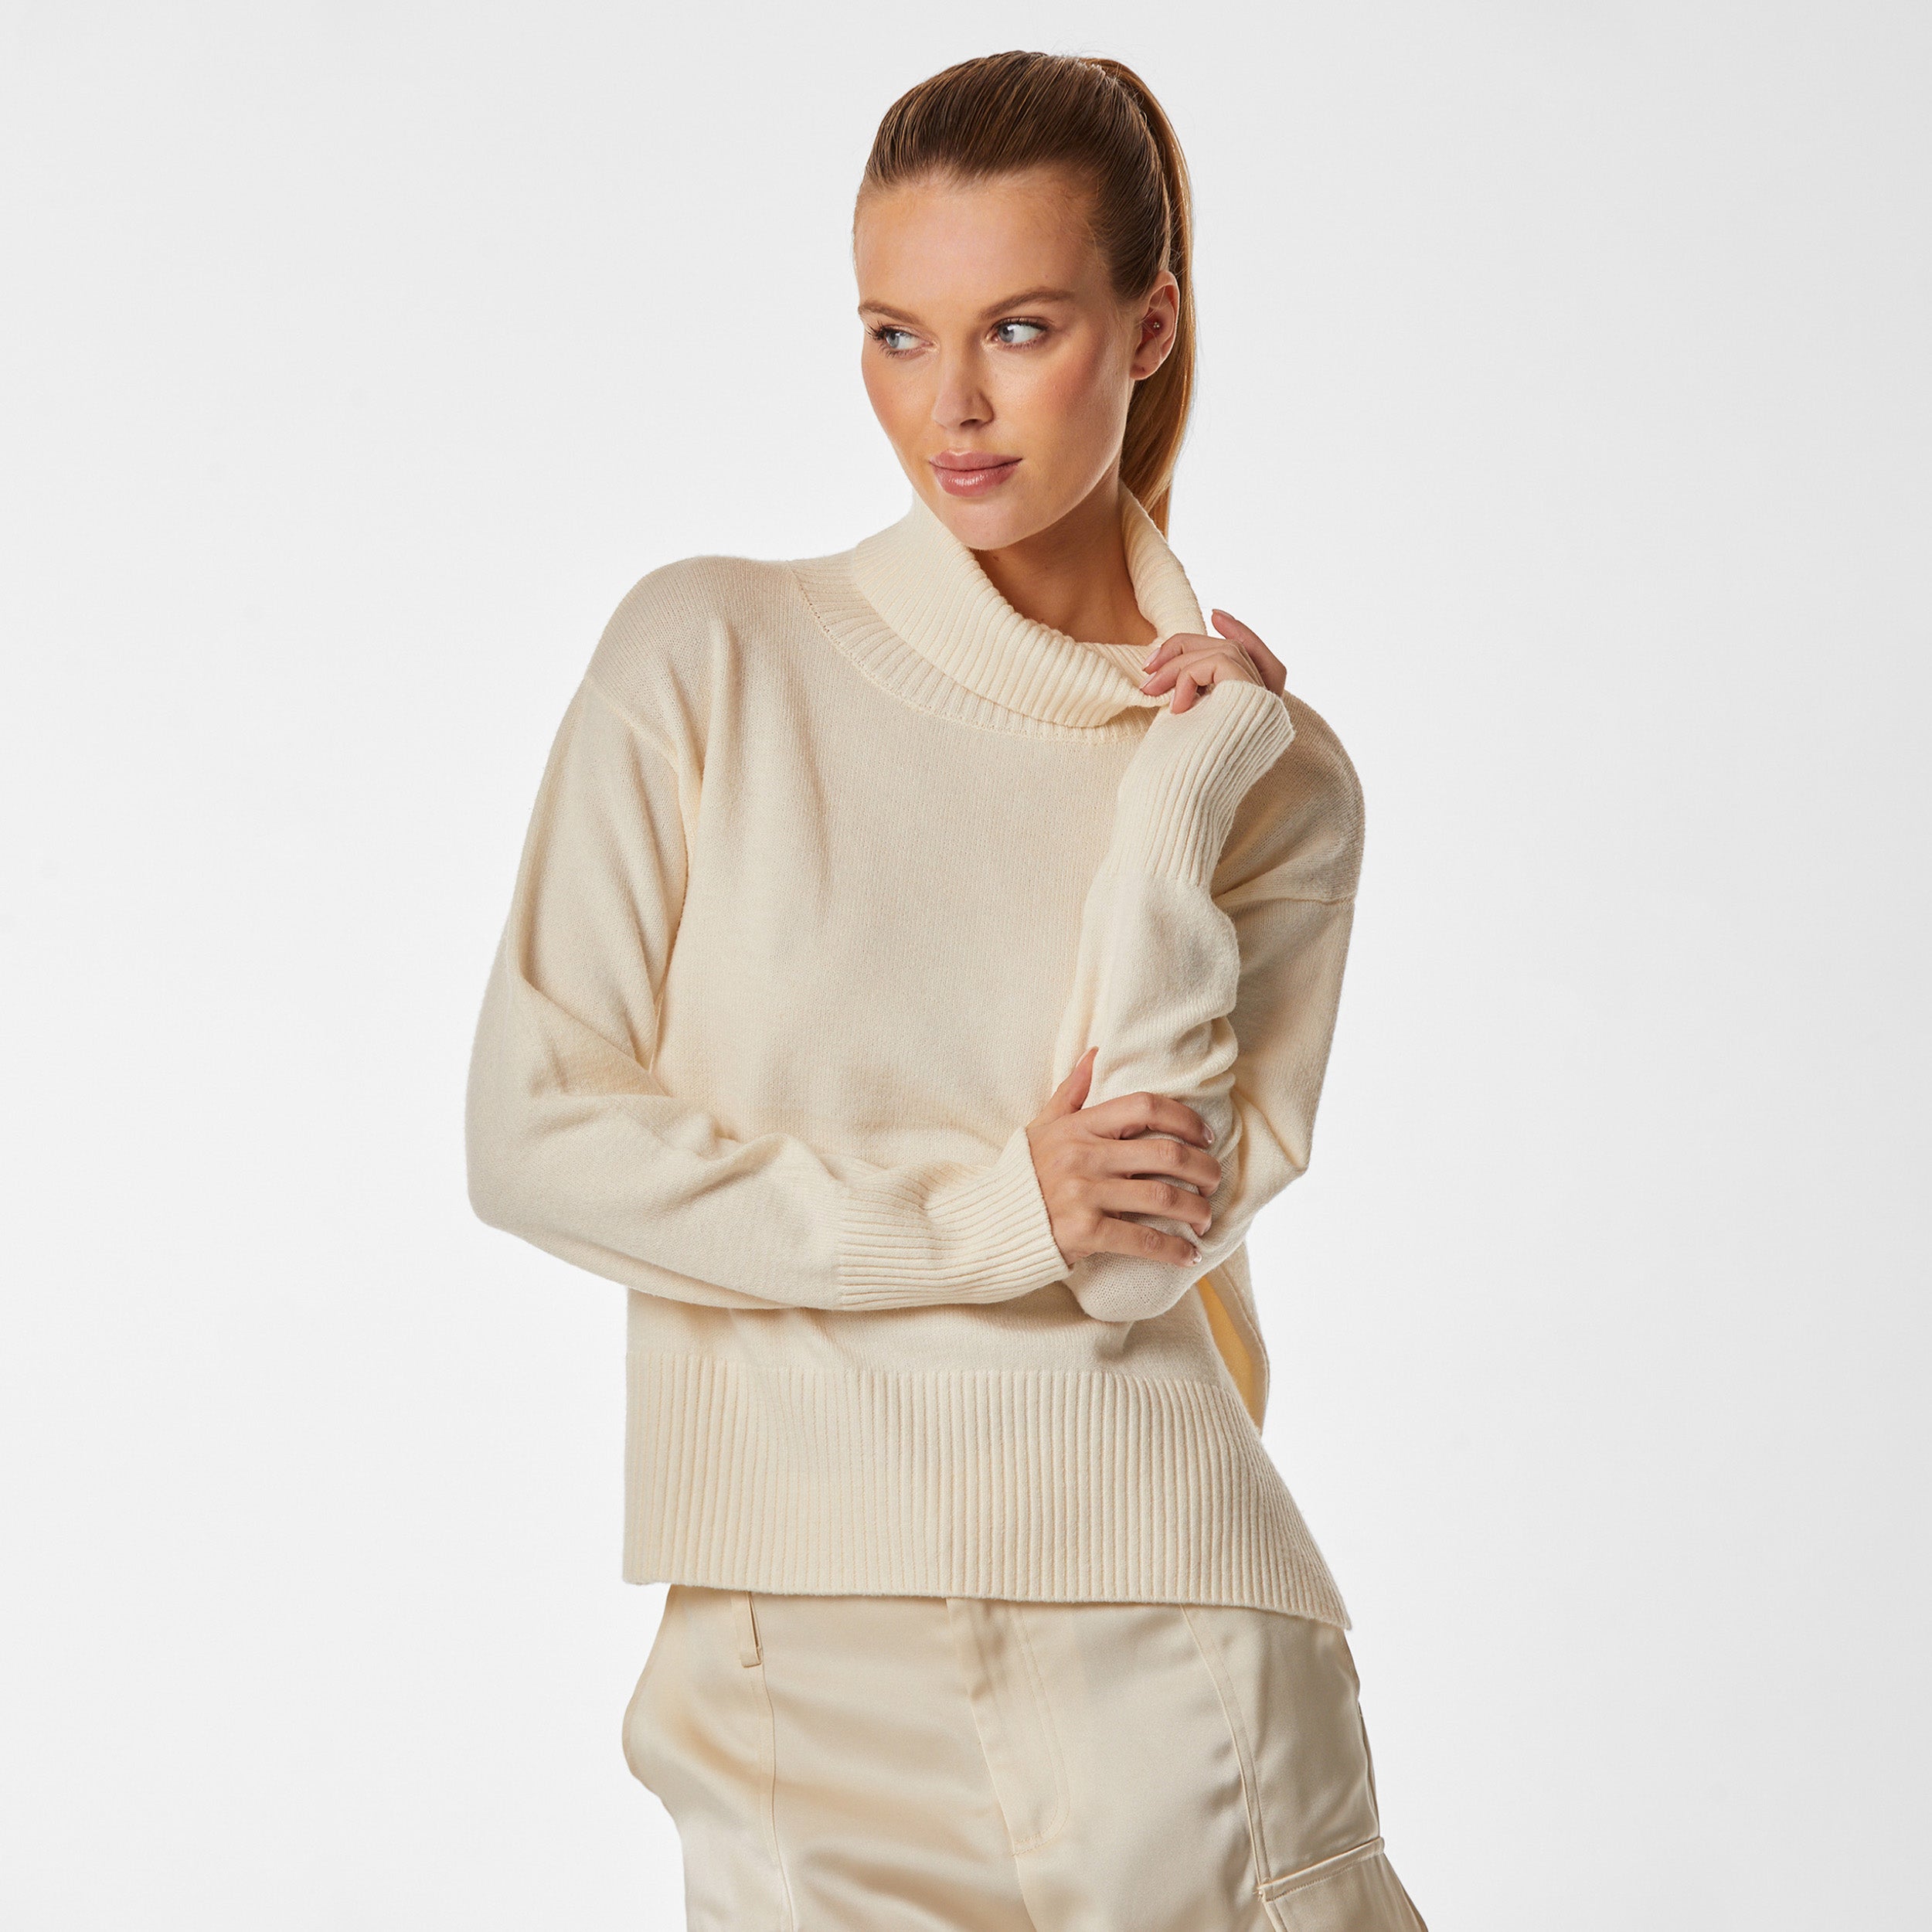 Woman wearing pearl colored oversized sweater